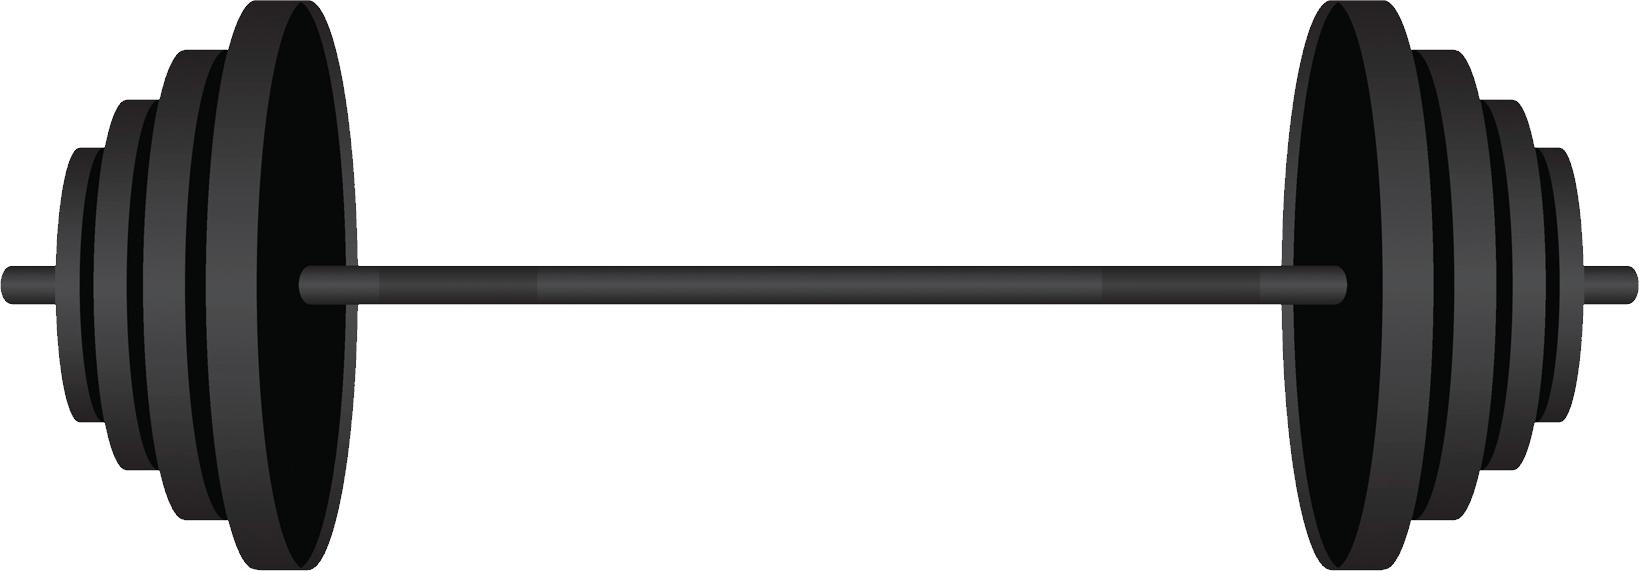 Barbell PNG Image Background